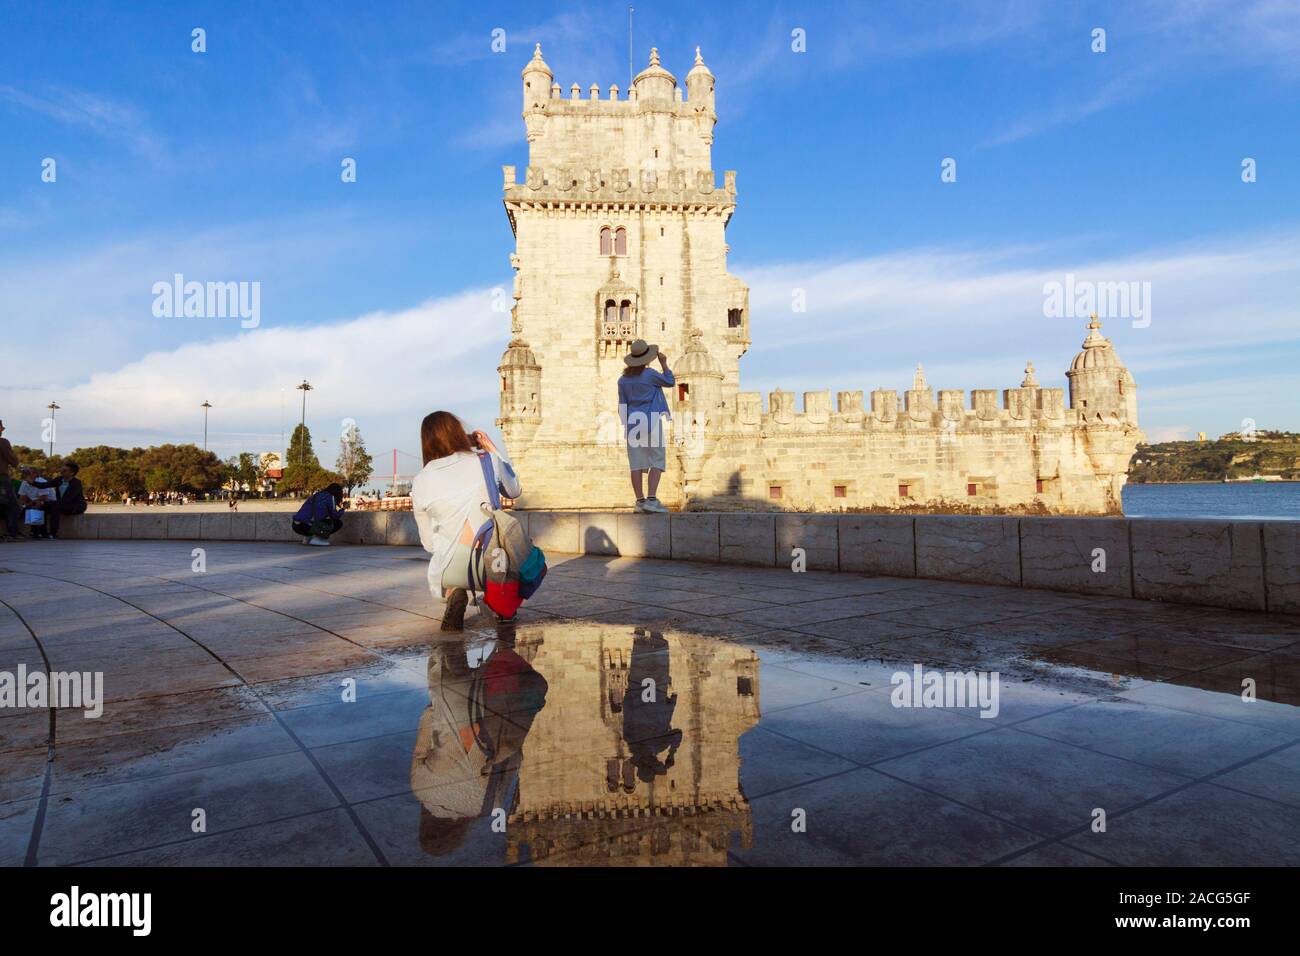 Lisbon, Portugal : Tourists take photos of the Belém Tower reflected on a puddle. The Unesco listed building was designed in 1515 by Francisco de Arru Stock Photo